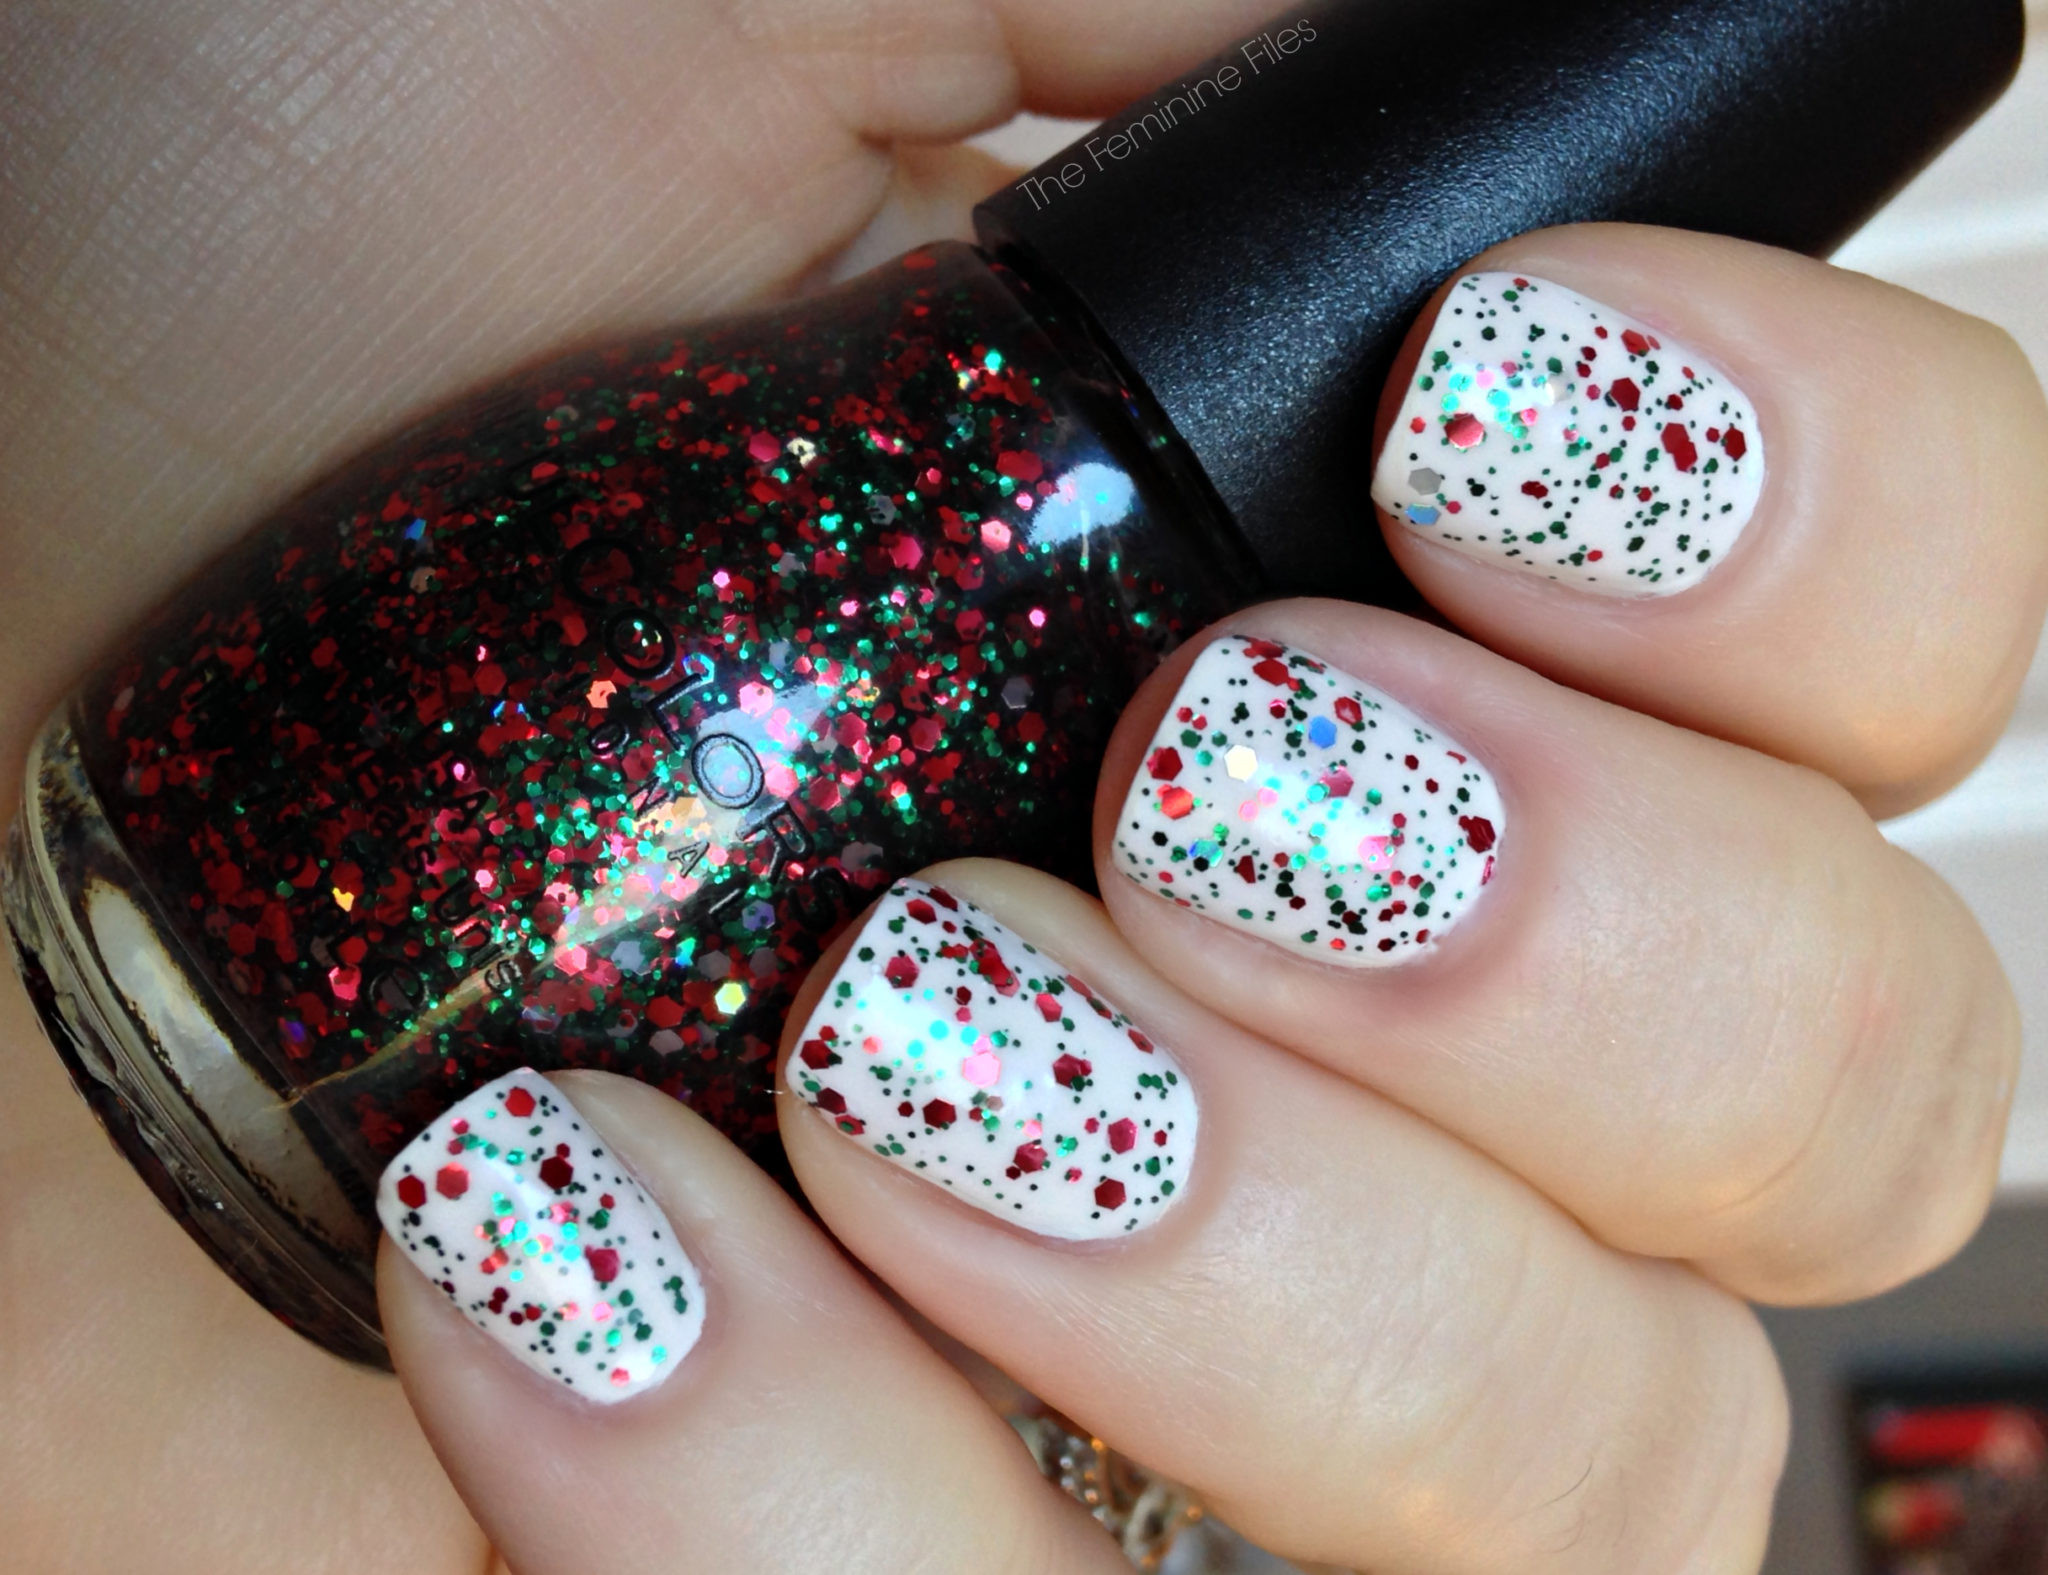 8. "Festive Holiday Nail Colors in a Whimsical Still Life" - wide 1